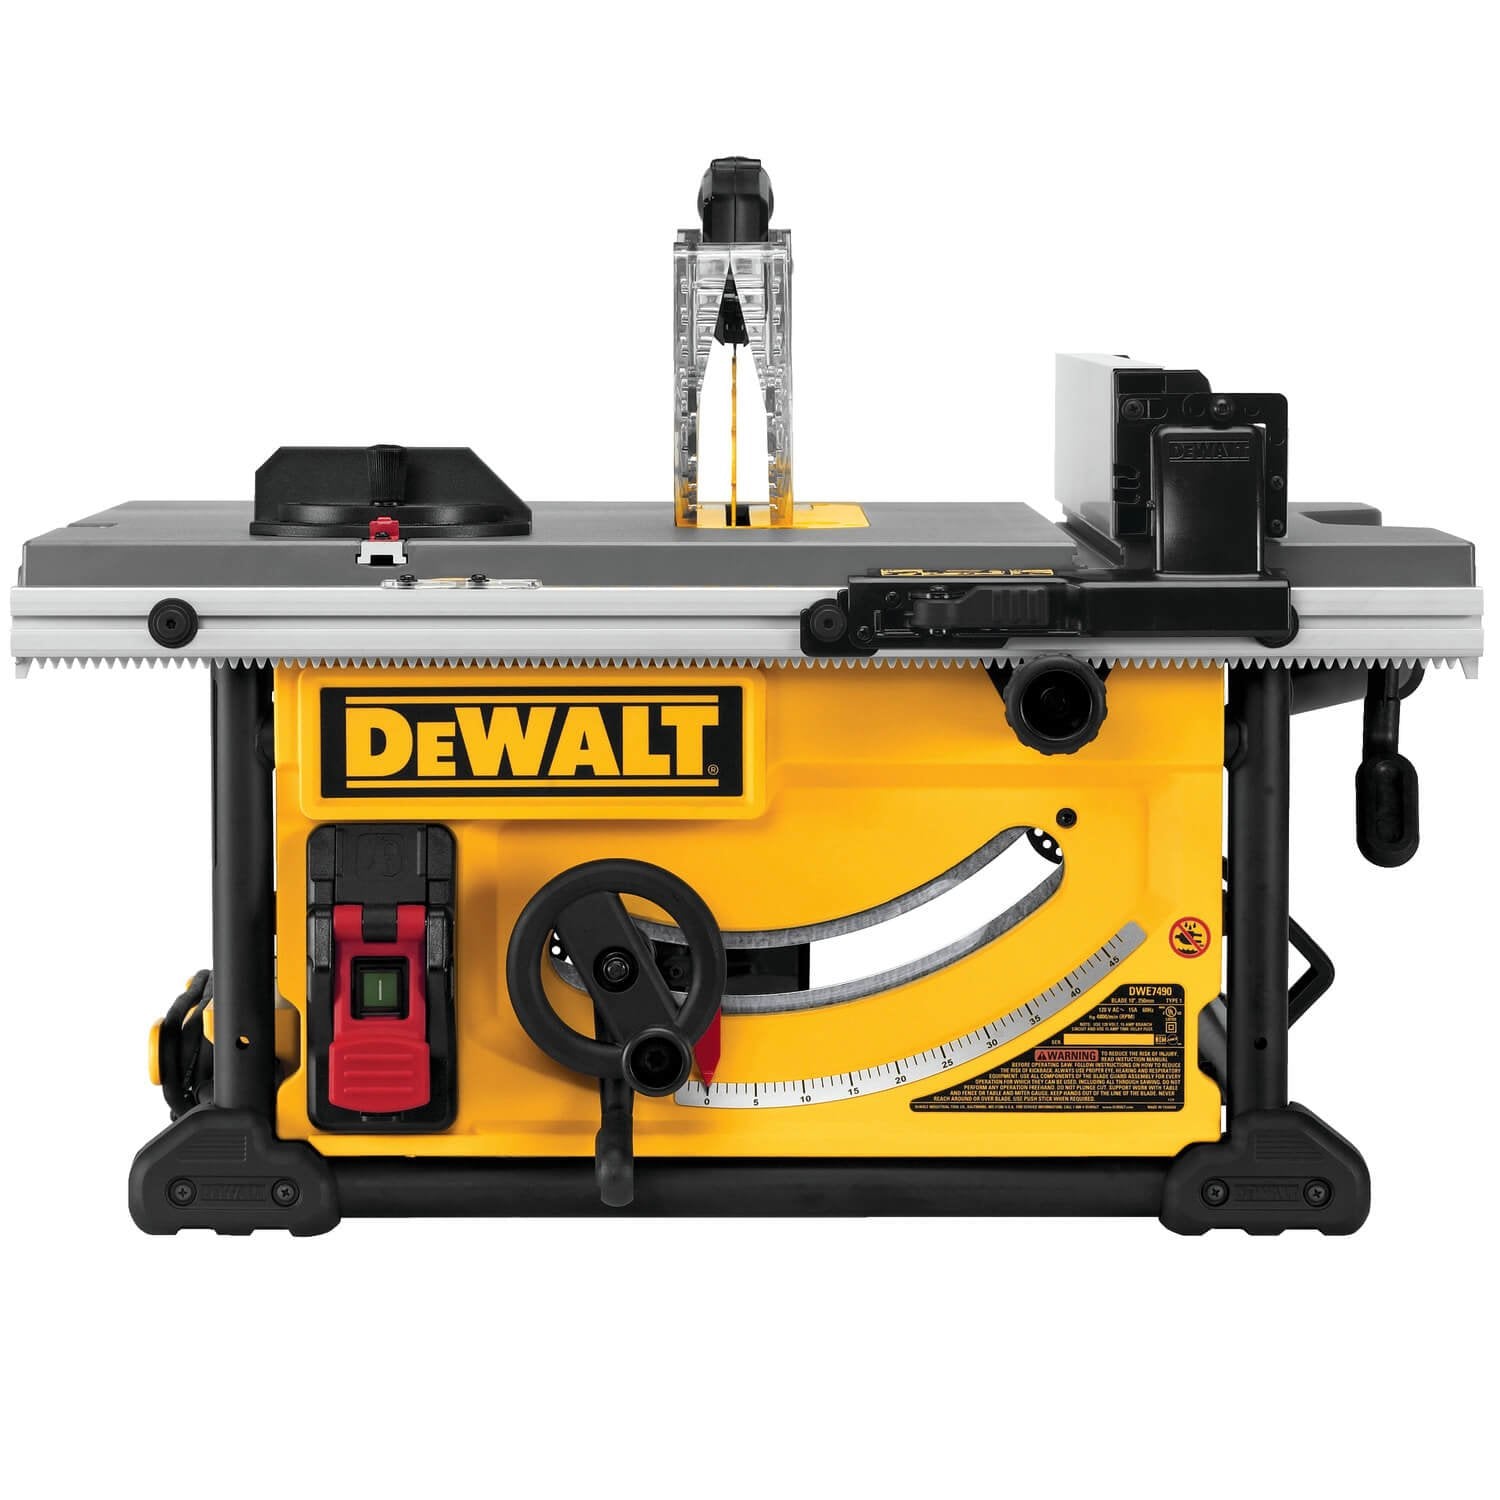 DEWALT DWE7491RS 10-Inch Jobsite Table Saw and Rolling Stand